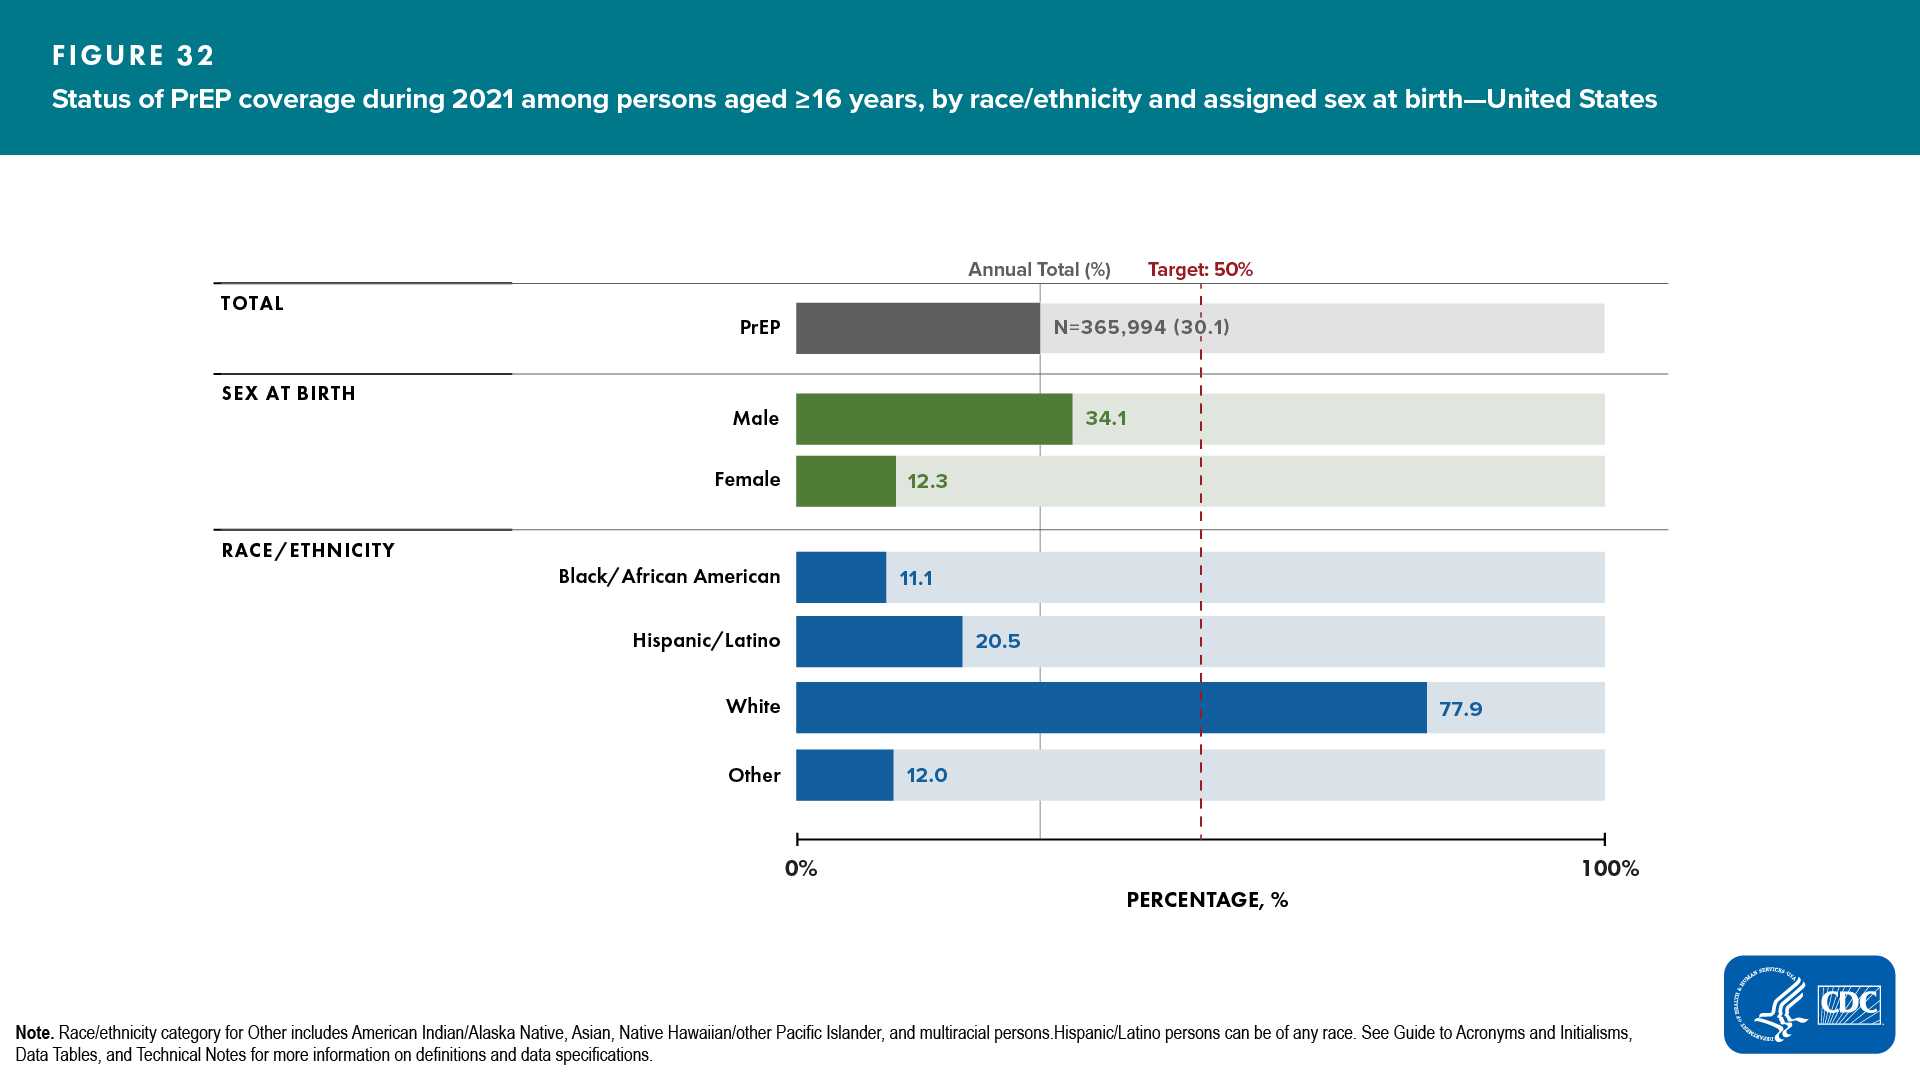 Figure 32. Status of PrEP coverage during 2021 among persons aged ≥16 years, by race/ethnicity and assigned sex at birth—United States